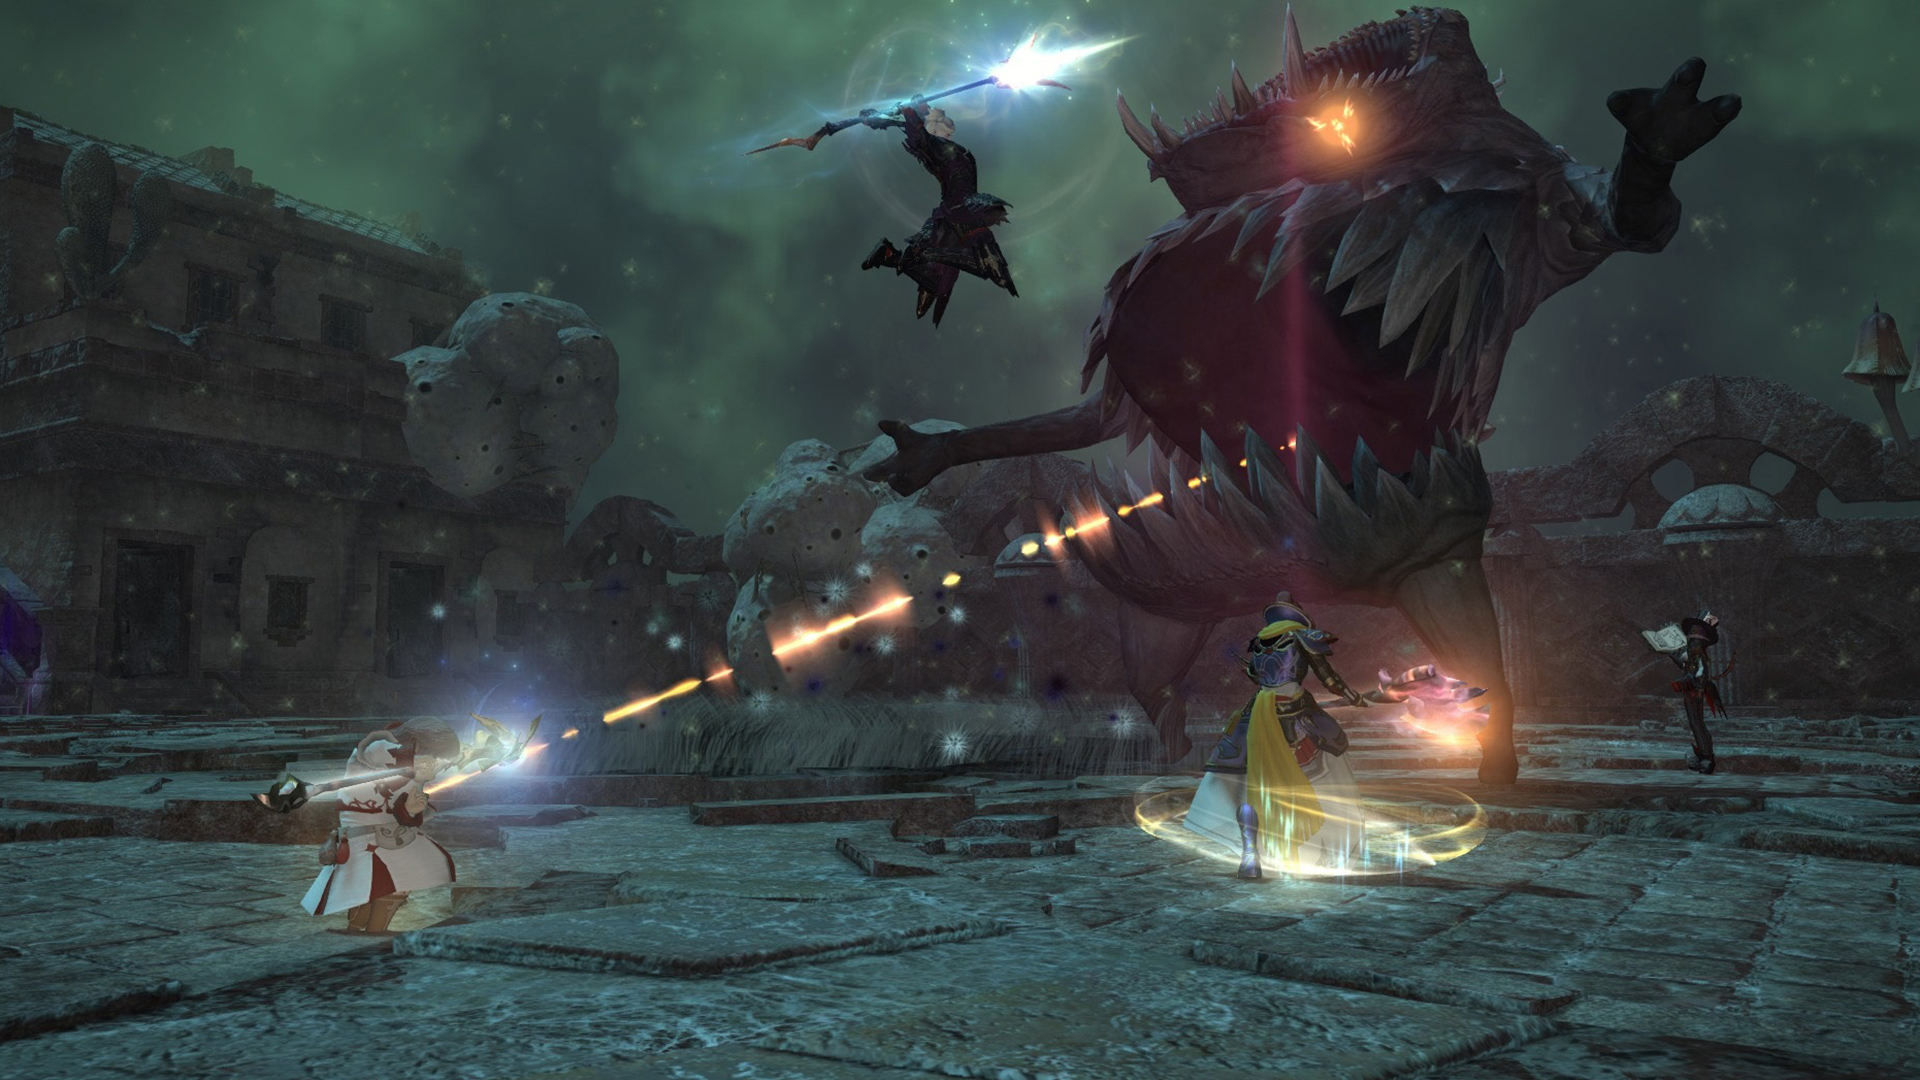 Final Fantasy XIV Online: A Realm Reborn Reviews, Pros and Cons